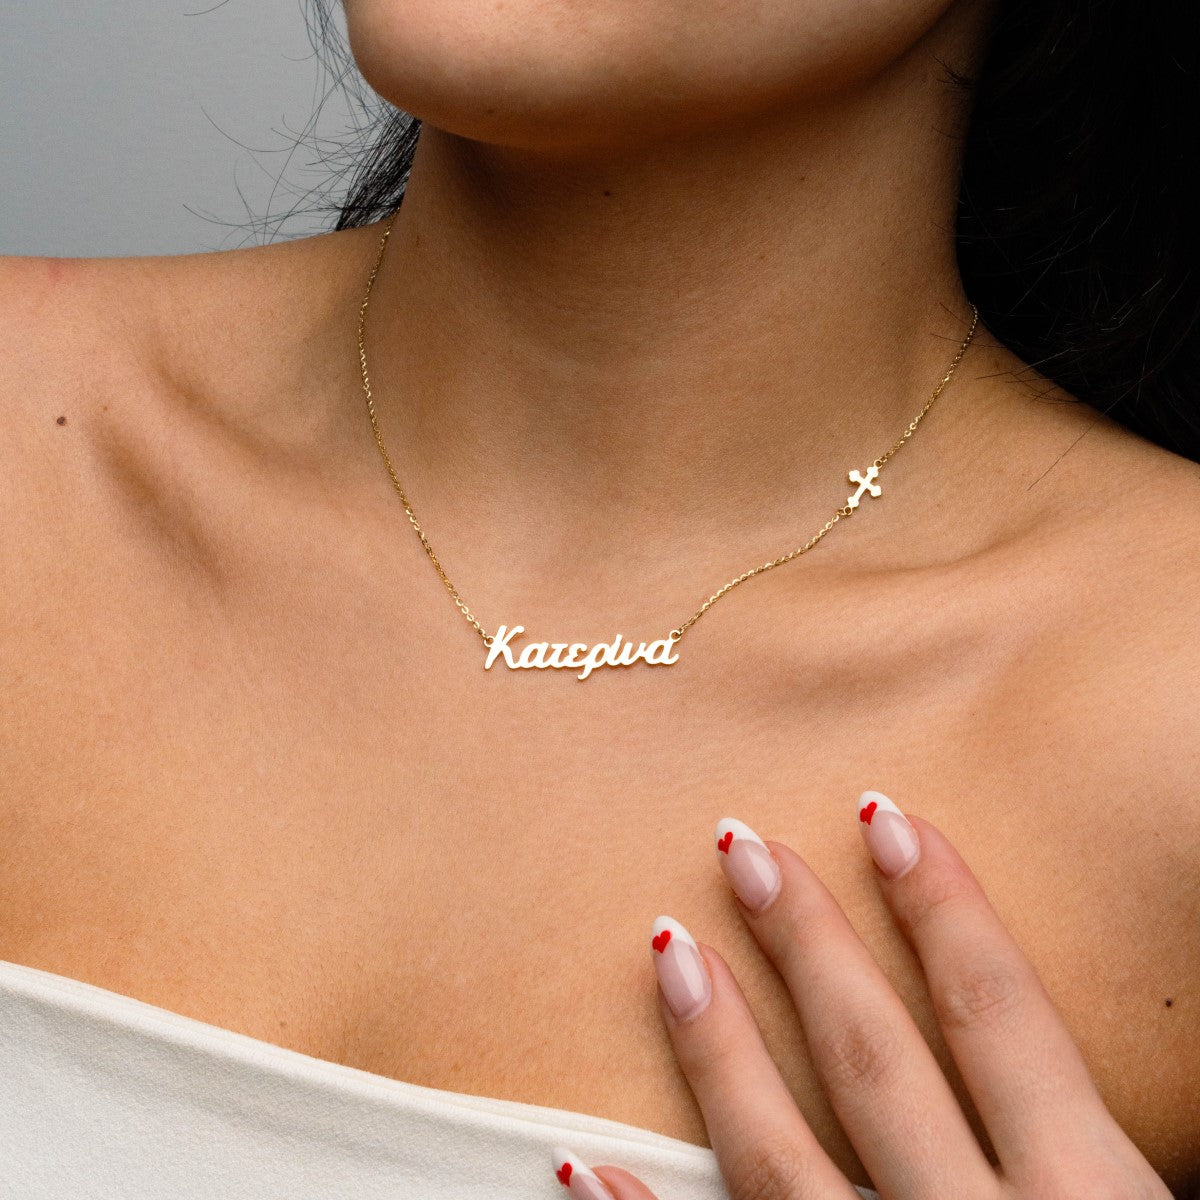 Greek Name Necklaces